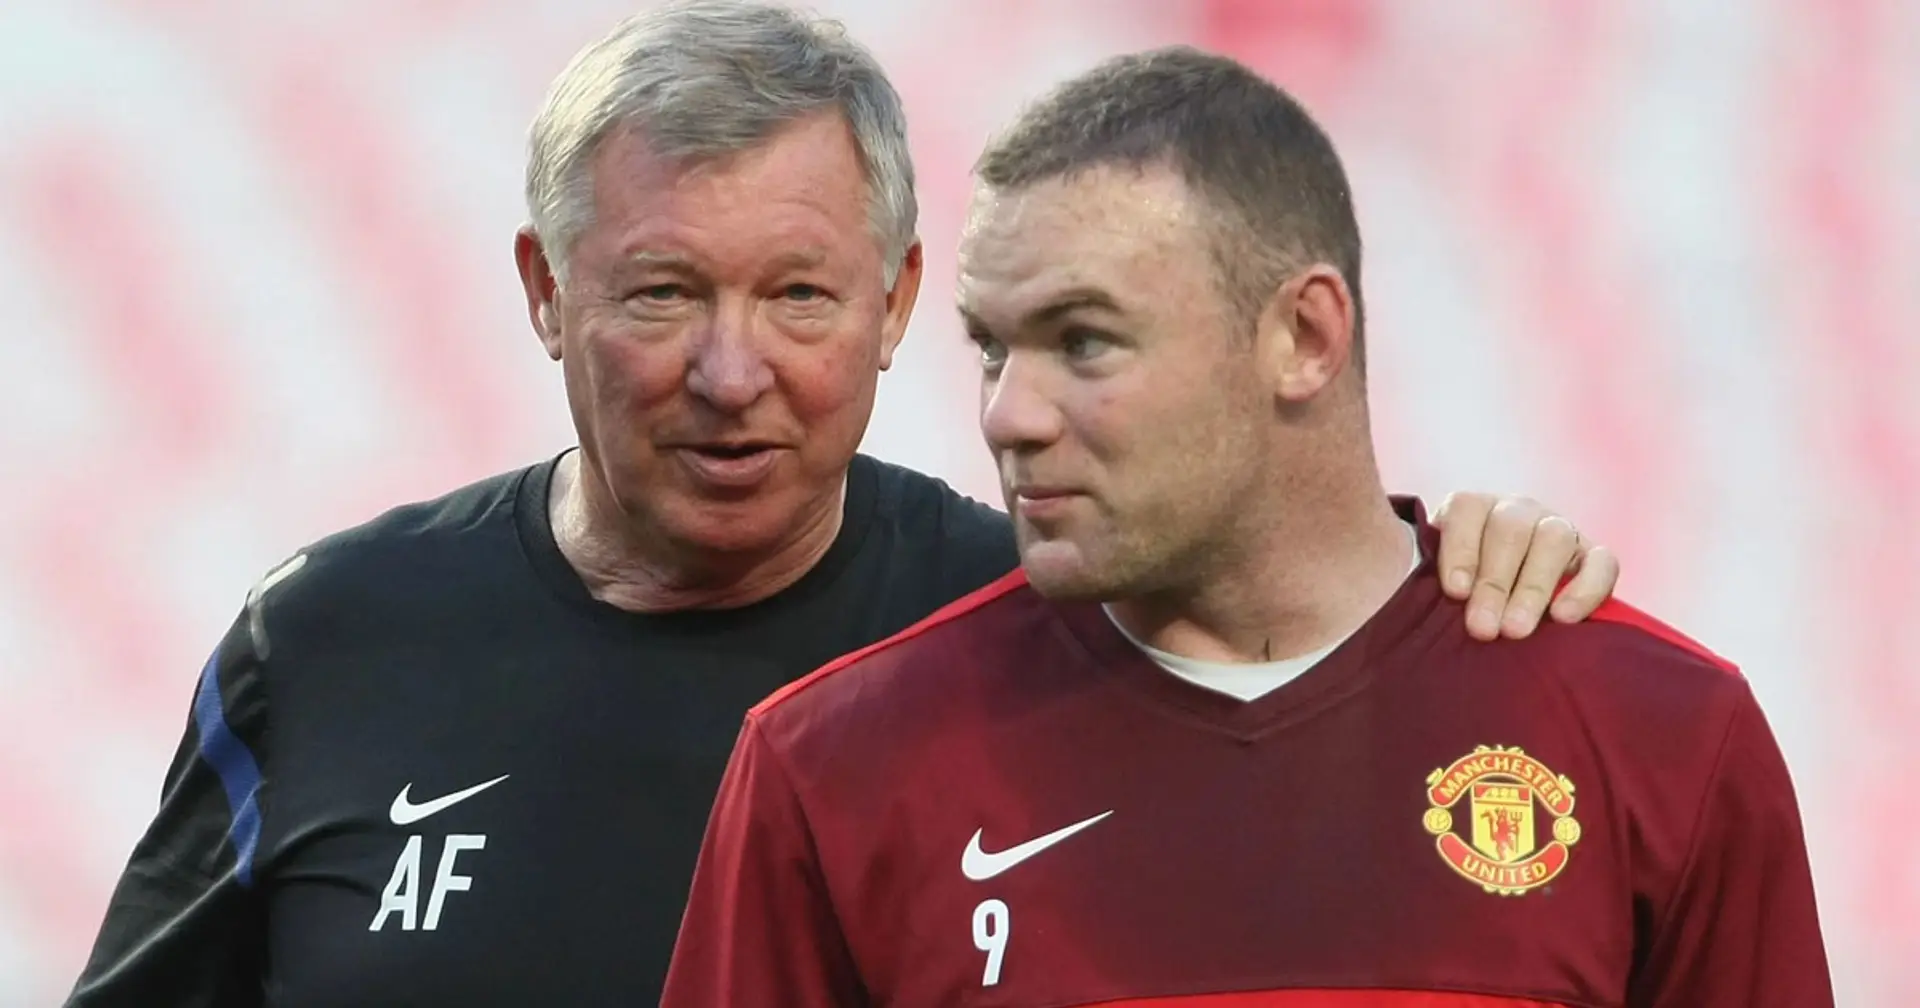 Rooney hints at future conversation with Sir Alex after becoming Derby County boss